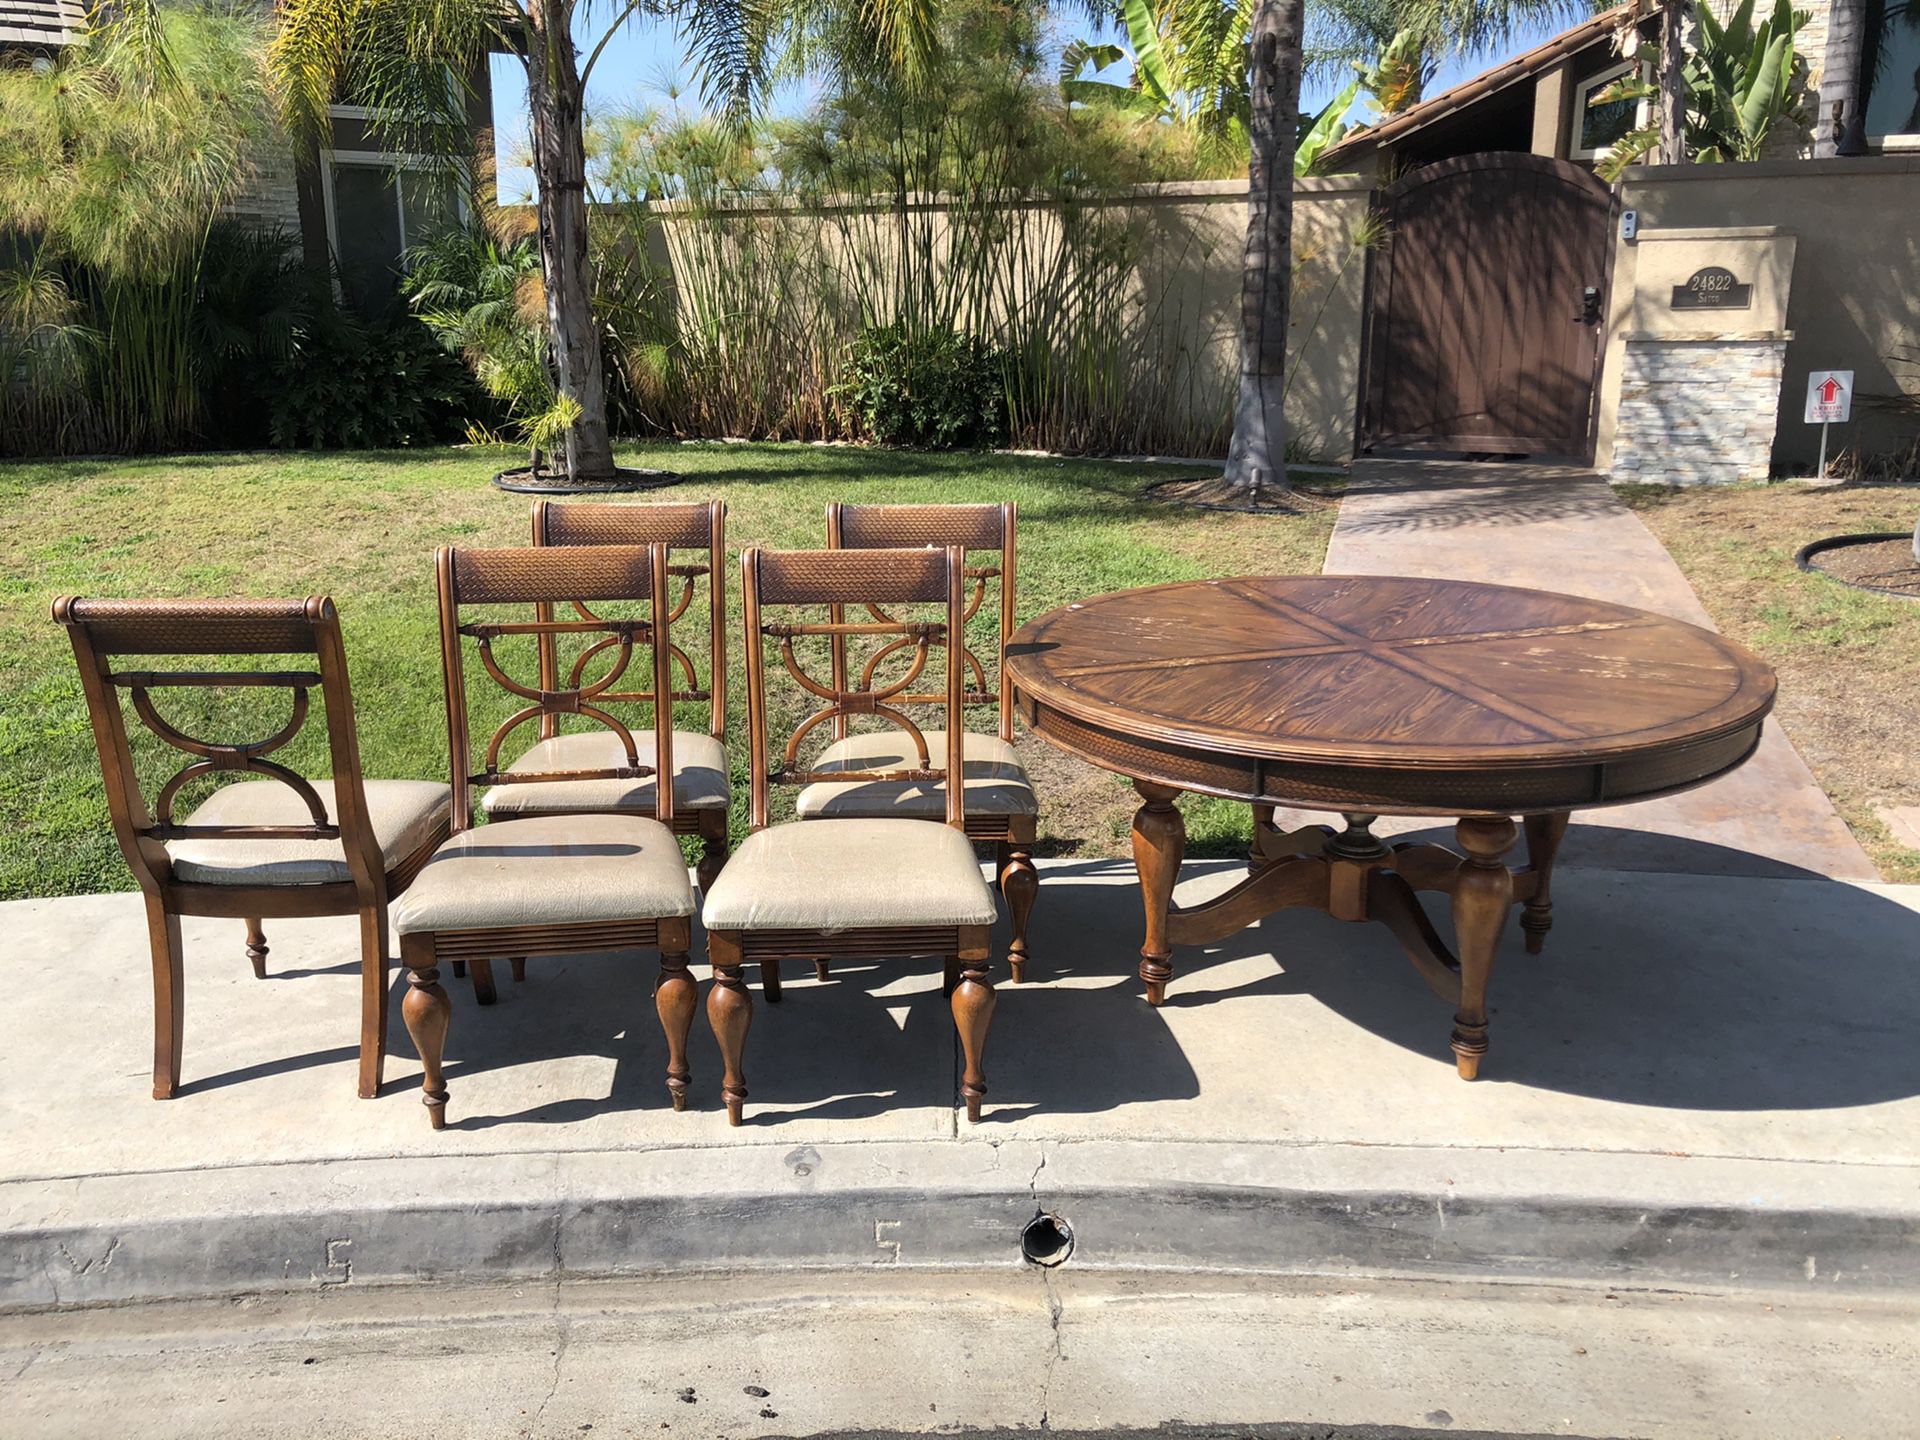 Free table & 5 chairs